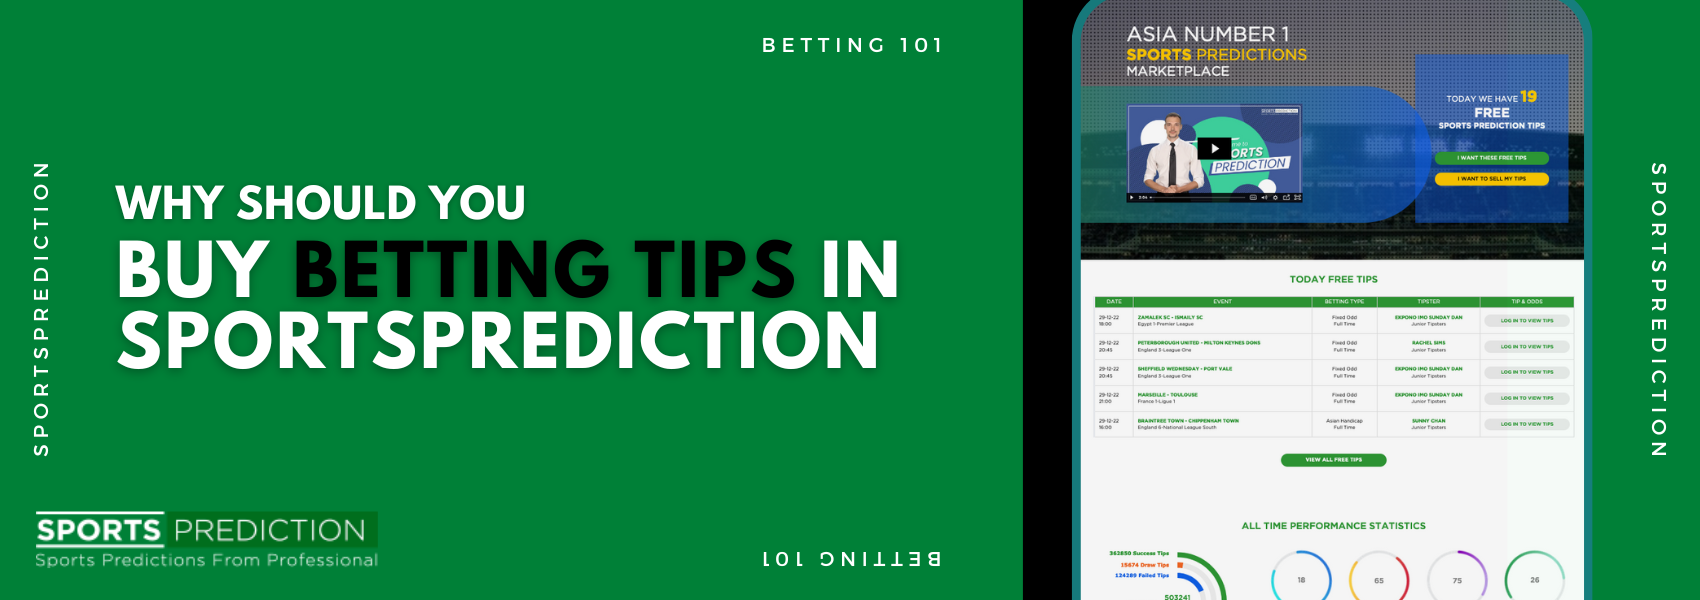 Why Should You Buy Betting Tips In Sportsprediction.asia?